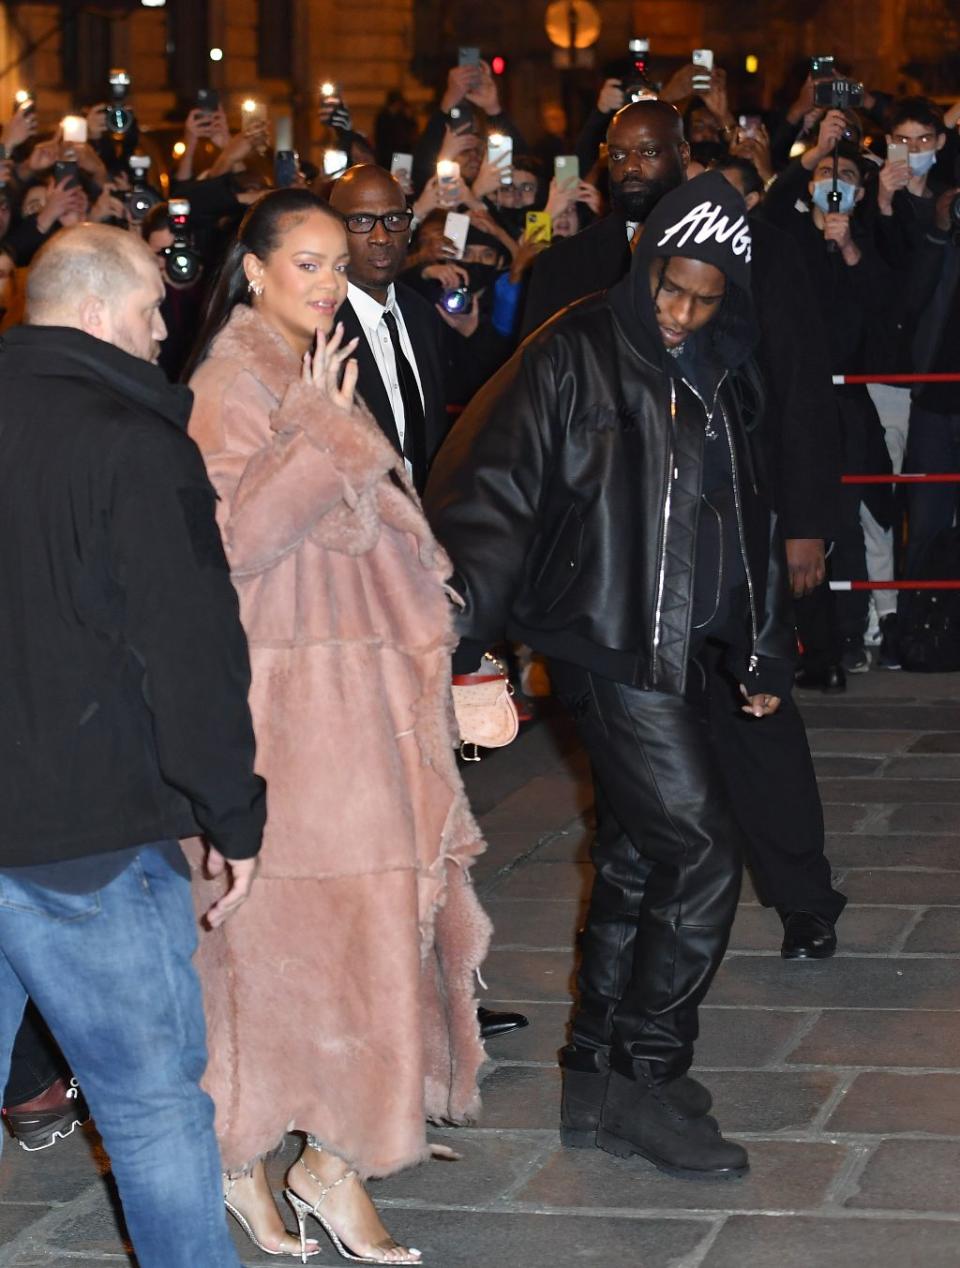 Rihanna and A$AP Rocky arrive at the Off-White Autumn/Winter 2022 fashion show in Paris on February 27, 2022. - Credit: KCS Presse / MEGA